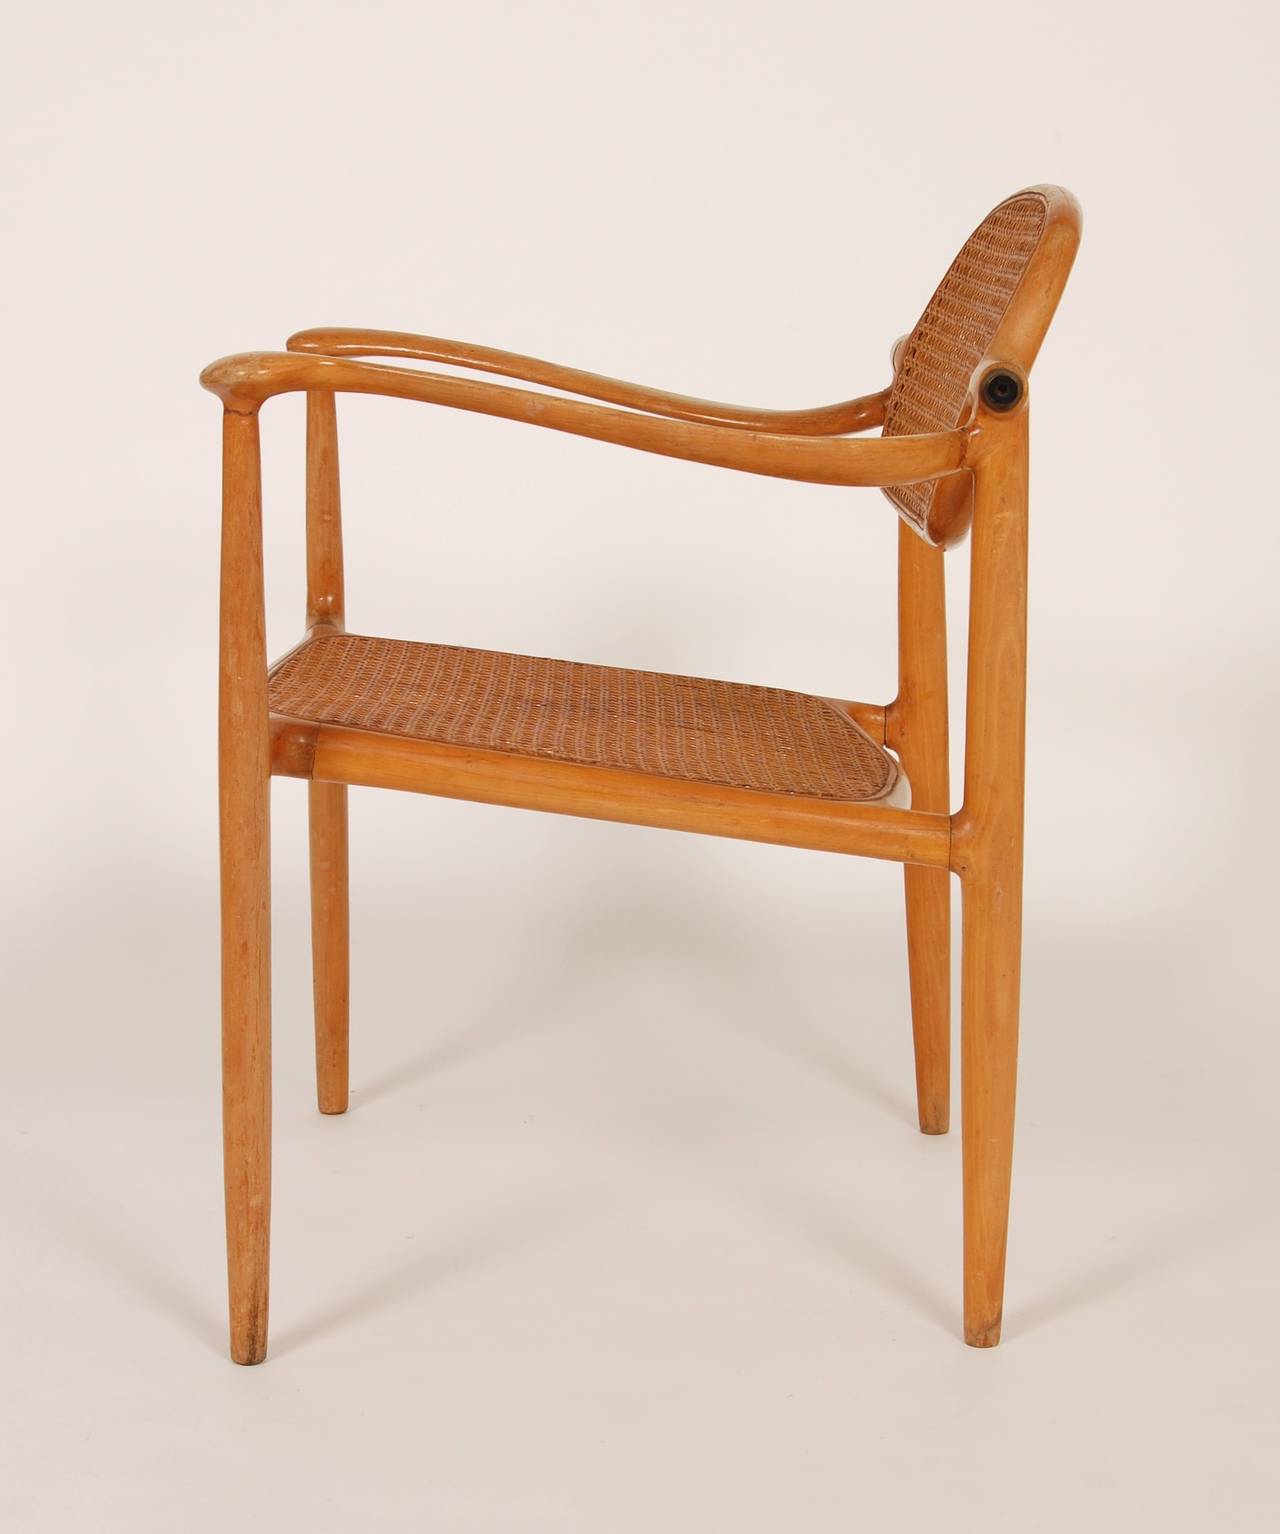 Carved Historical Paul Tuttle Chair